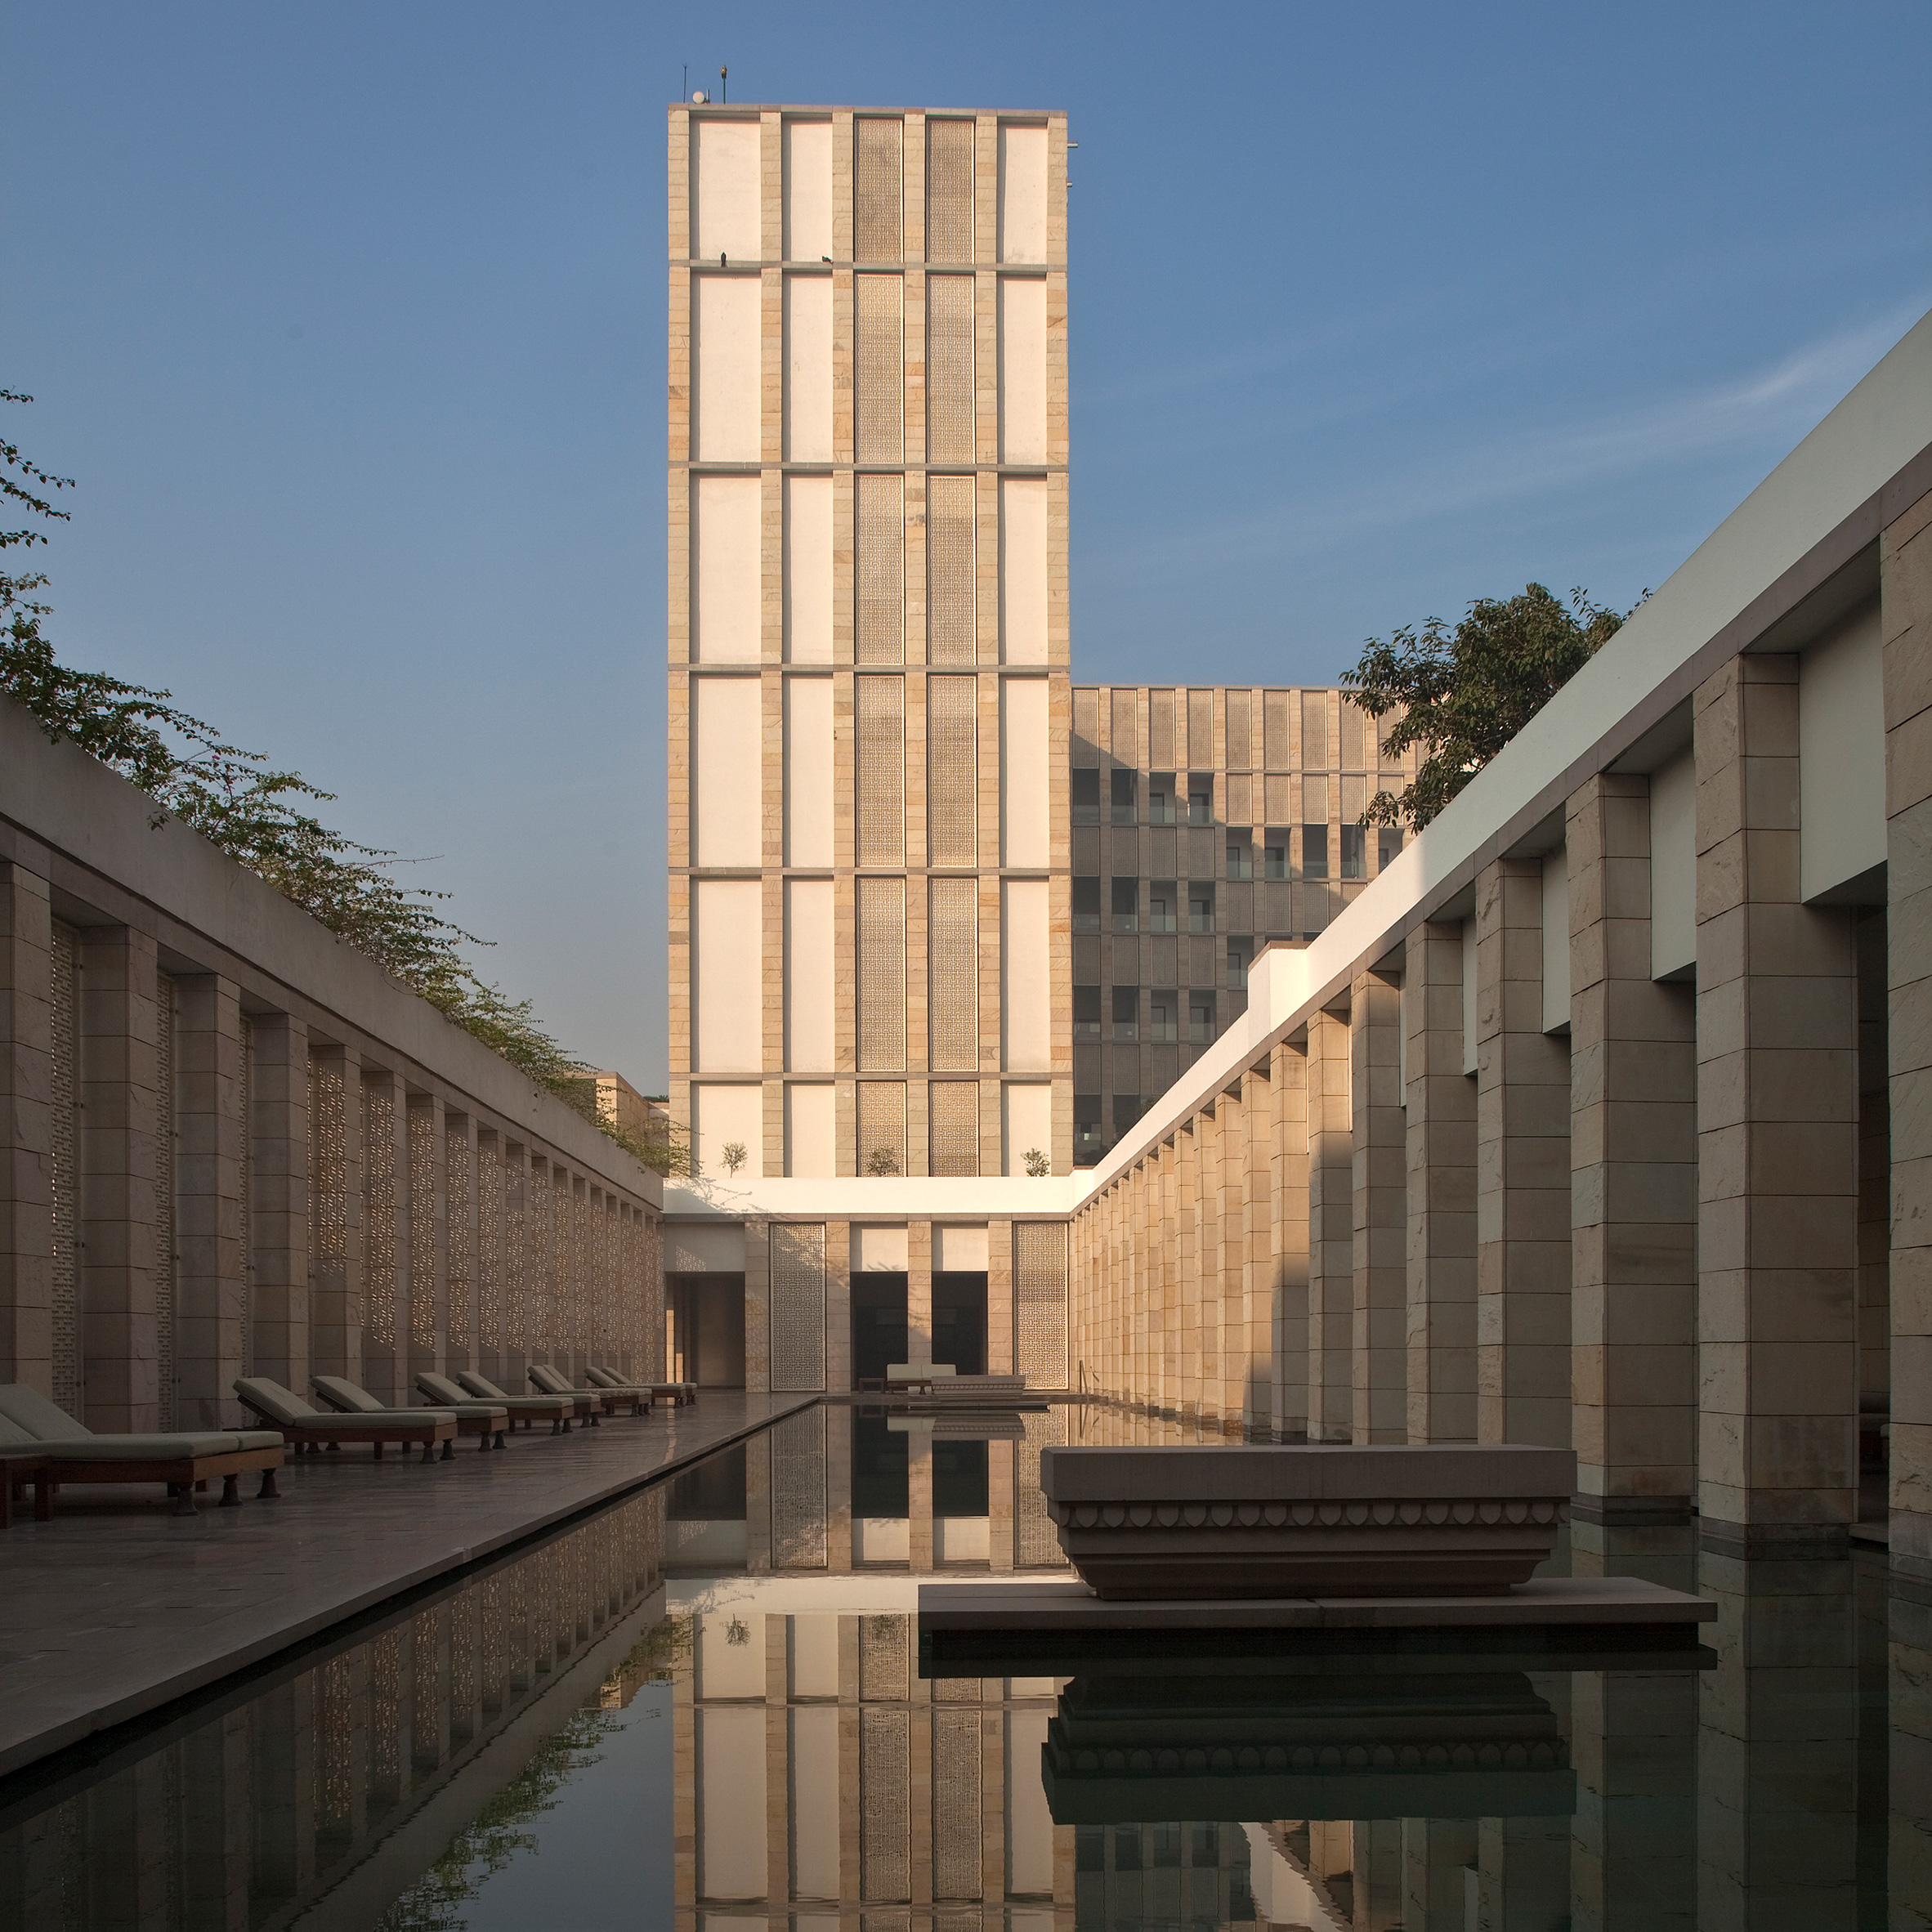 Aman New Delhi by Kerry Hill Architects